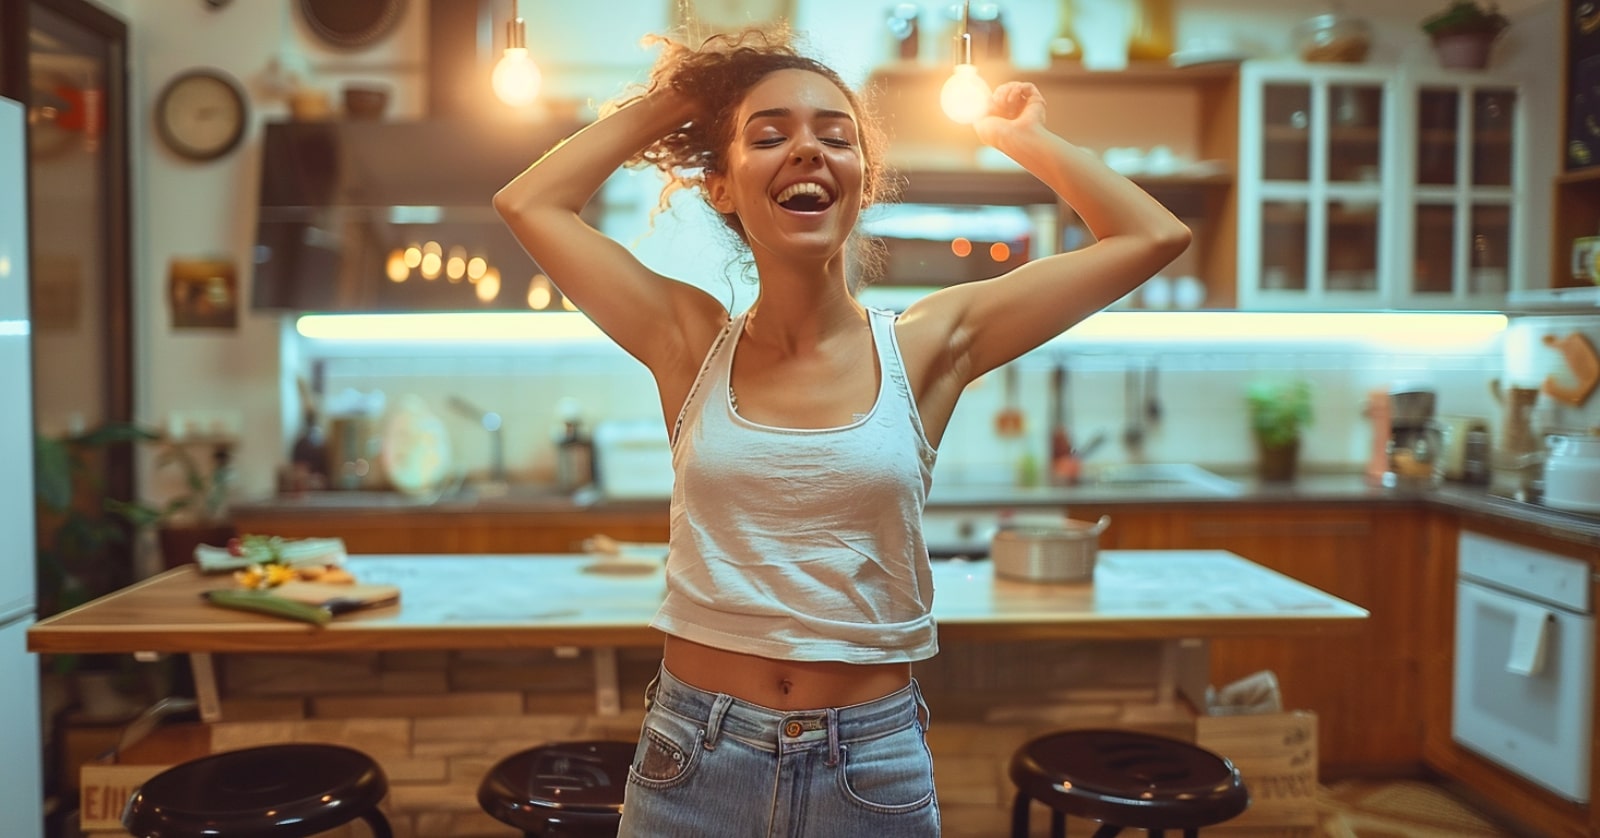 quirky young woman dancing in her kitchen with her hands in the air and an expression of joy on her face